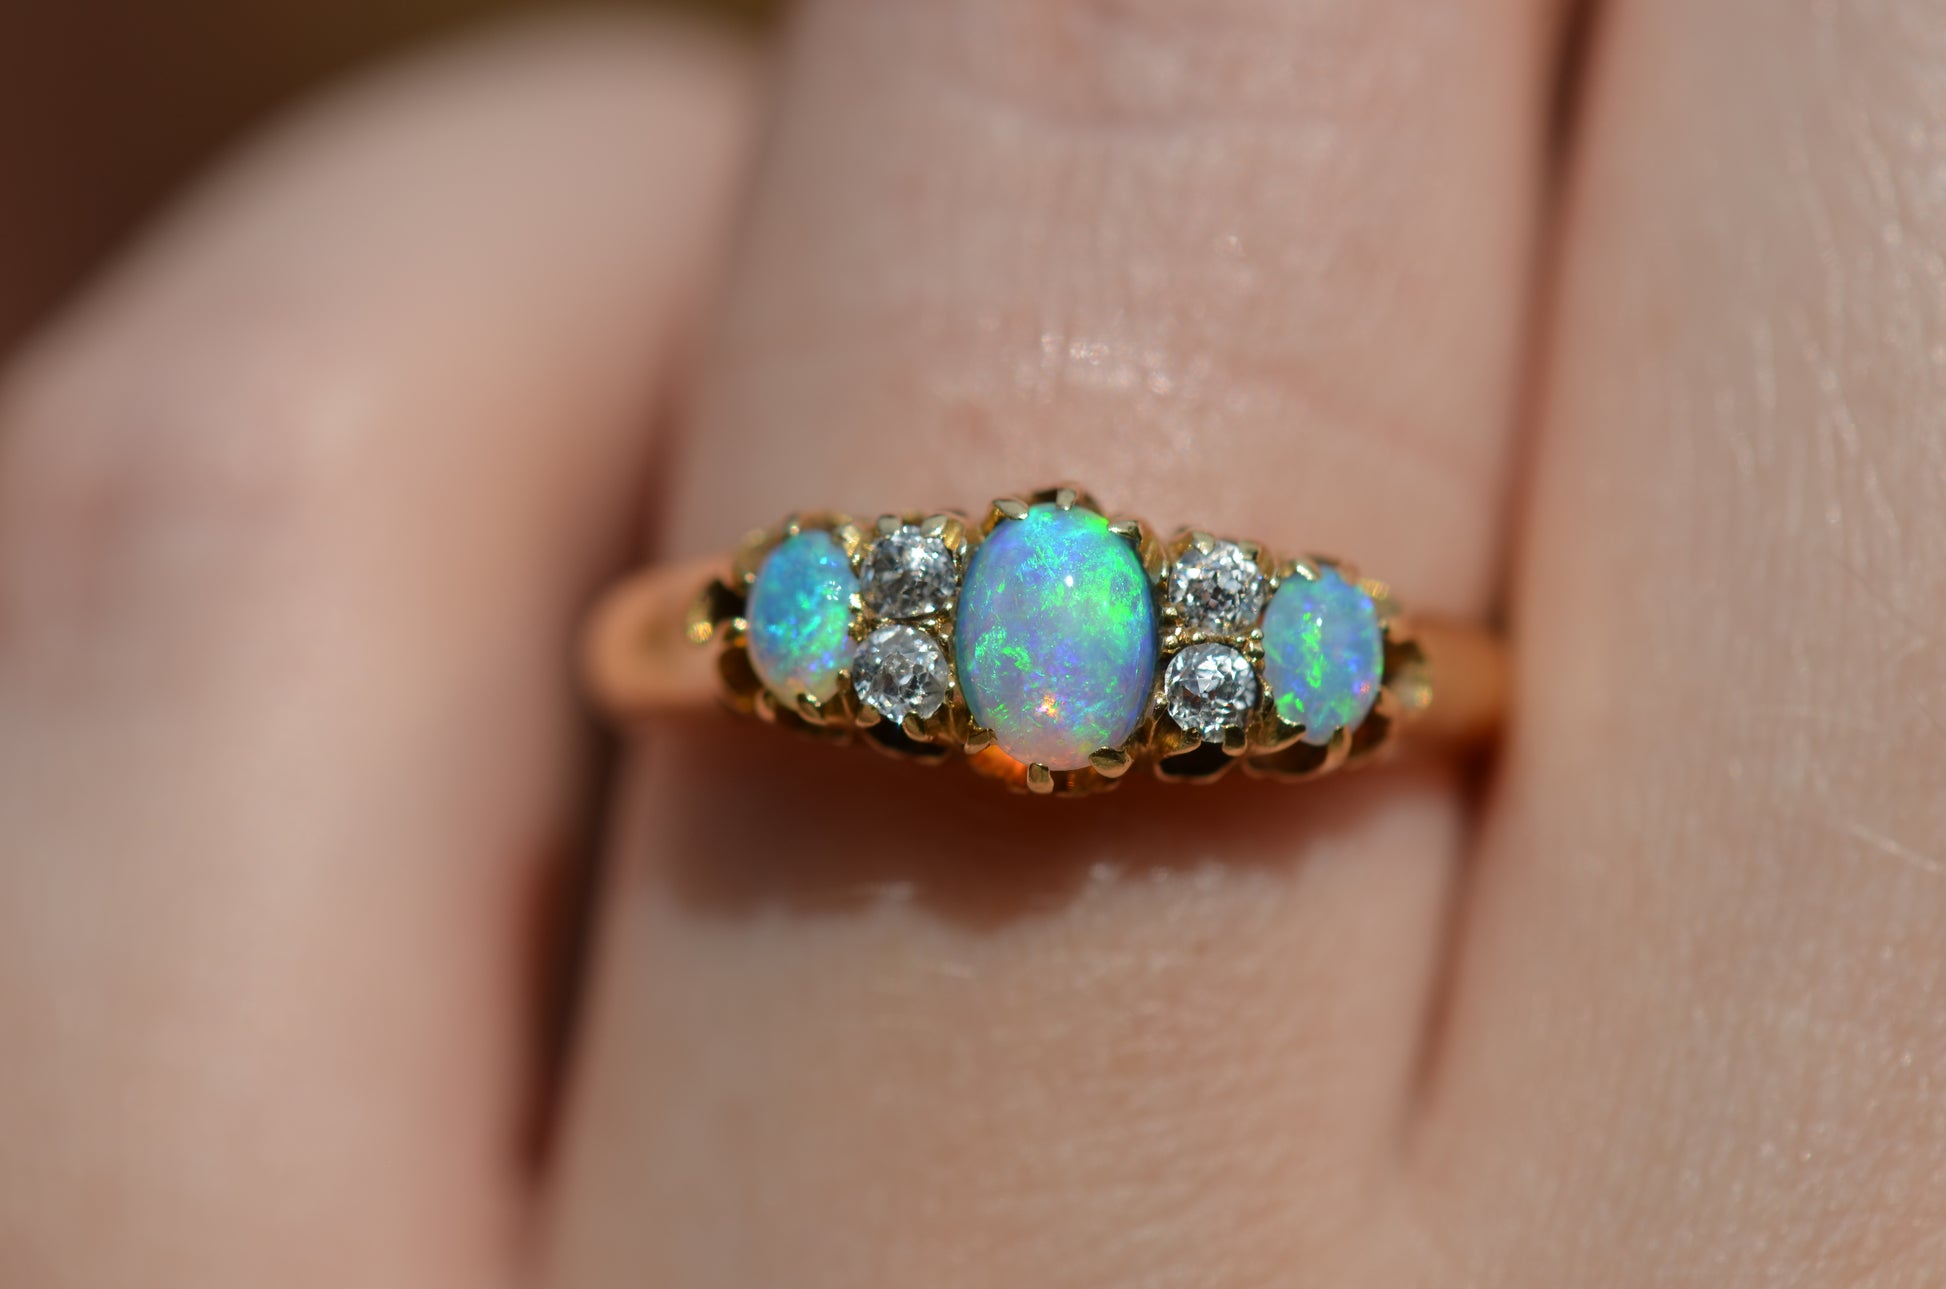 A very tightly cropped macro of the ring on a Caucasian model, showing the scale to the ring on the hand as well as the play of color of the opals in direct sunlight.